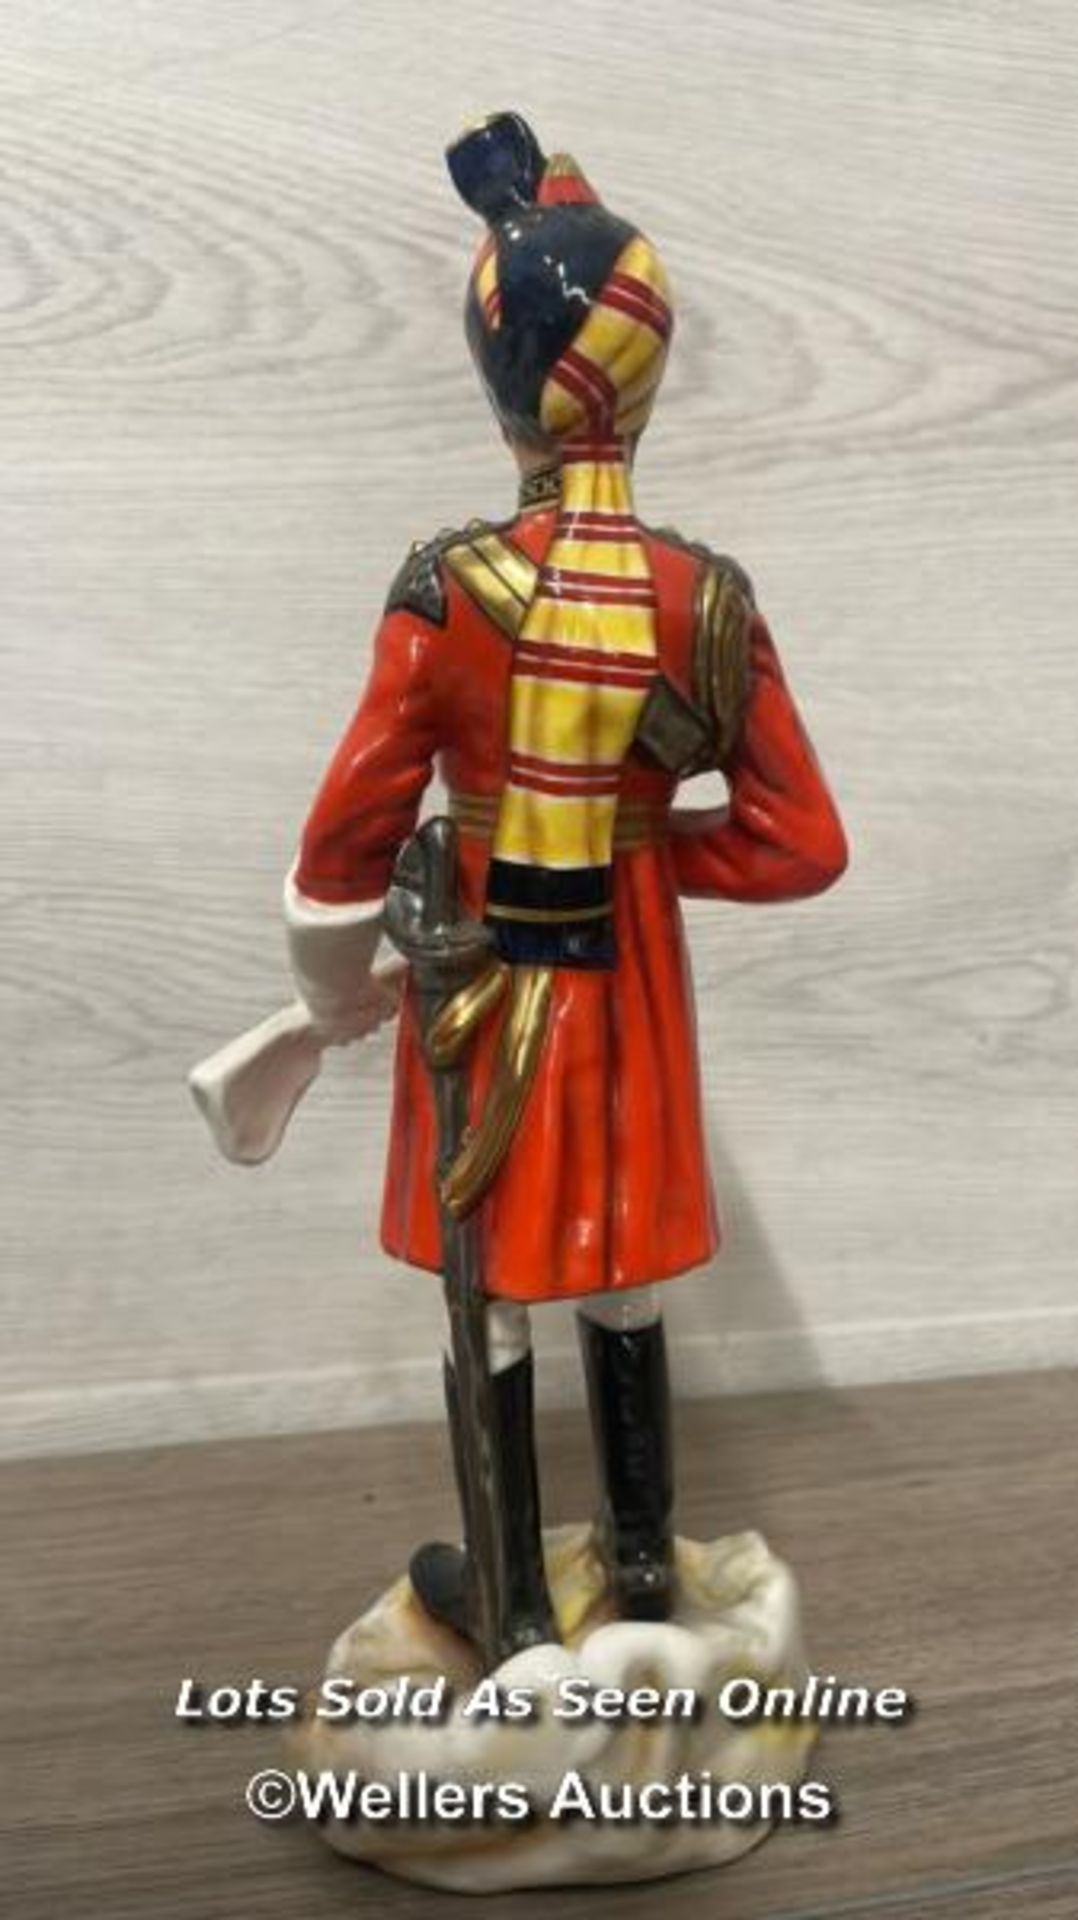 MICHAEL J SUTTY HAND PAINTED PORCELAIN FIGURE, GOVERNORS BODYGUARDS, MADRAS, MODEL NO.106 LIMITED - Image 2 of 5